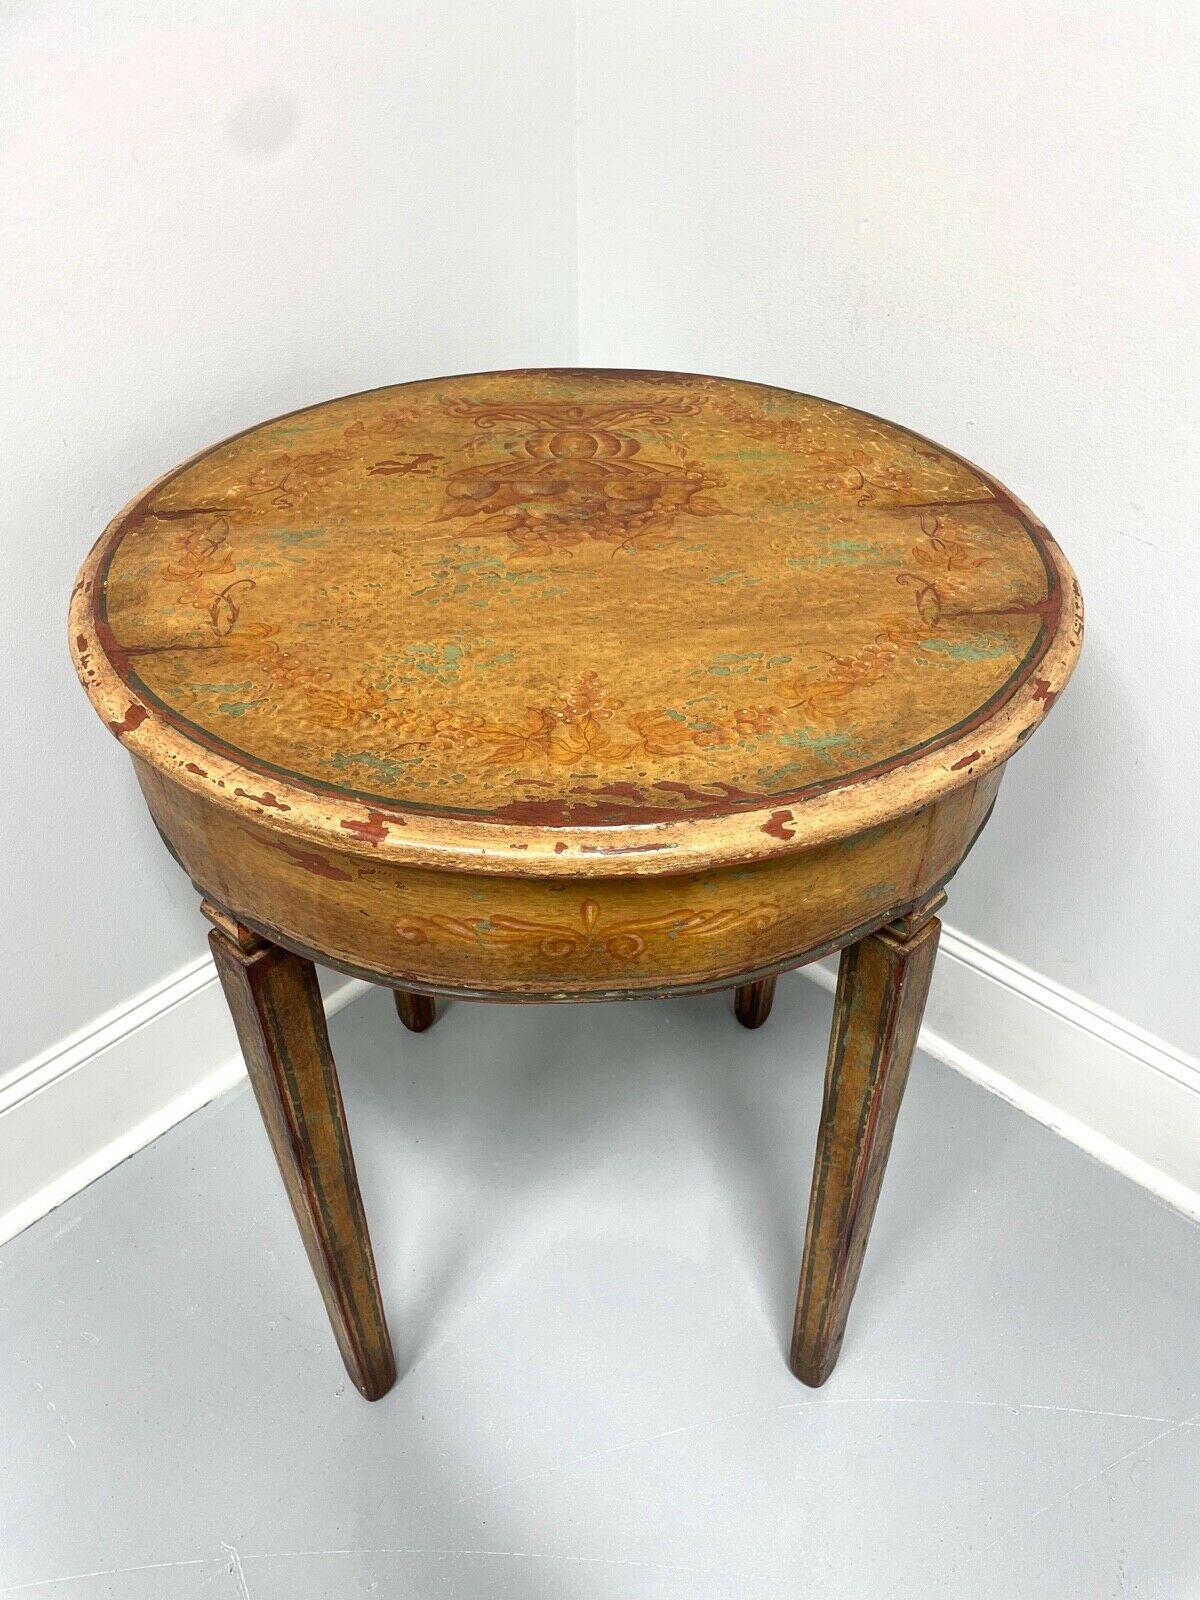 European Antique 18th Century Hand Painted Round Accent Table For Sale